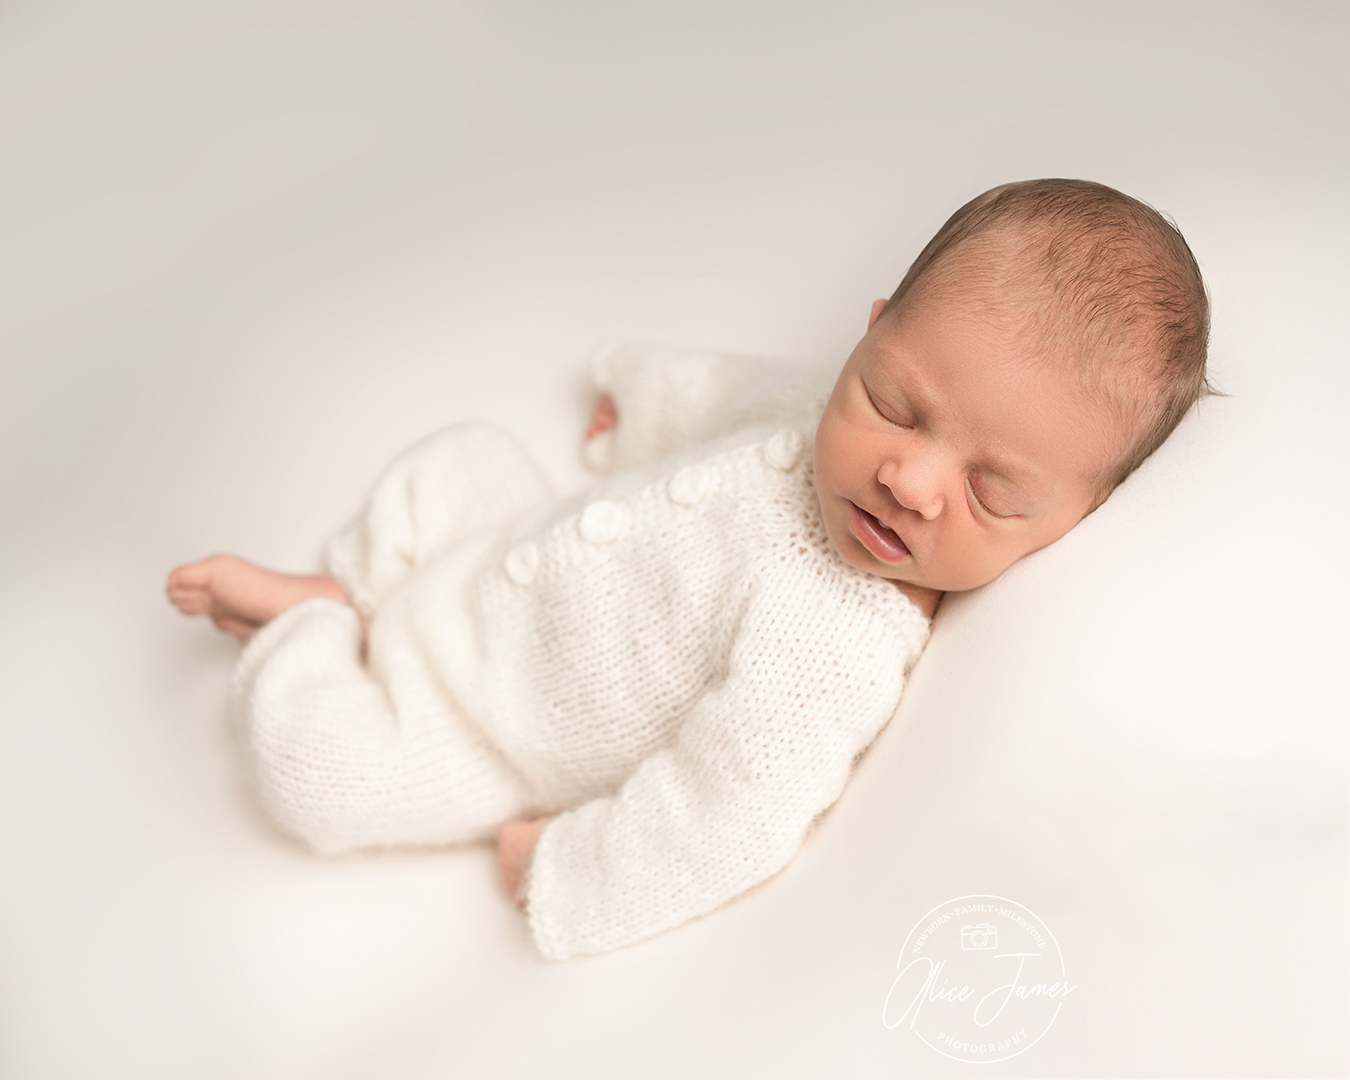 baby boy asleep at his newborn photoshoot Bedford. Wearing a cream knitted romper suit.